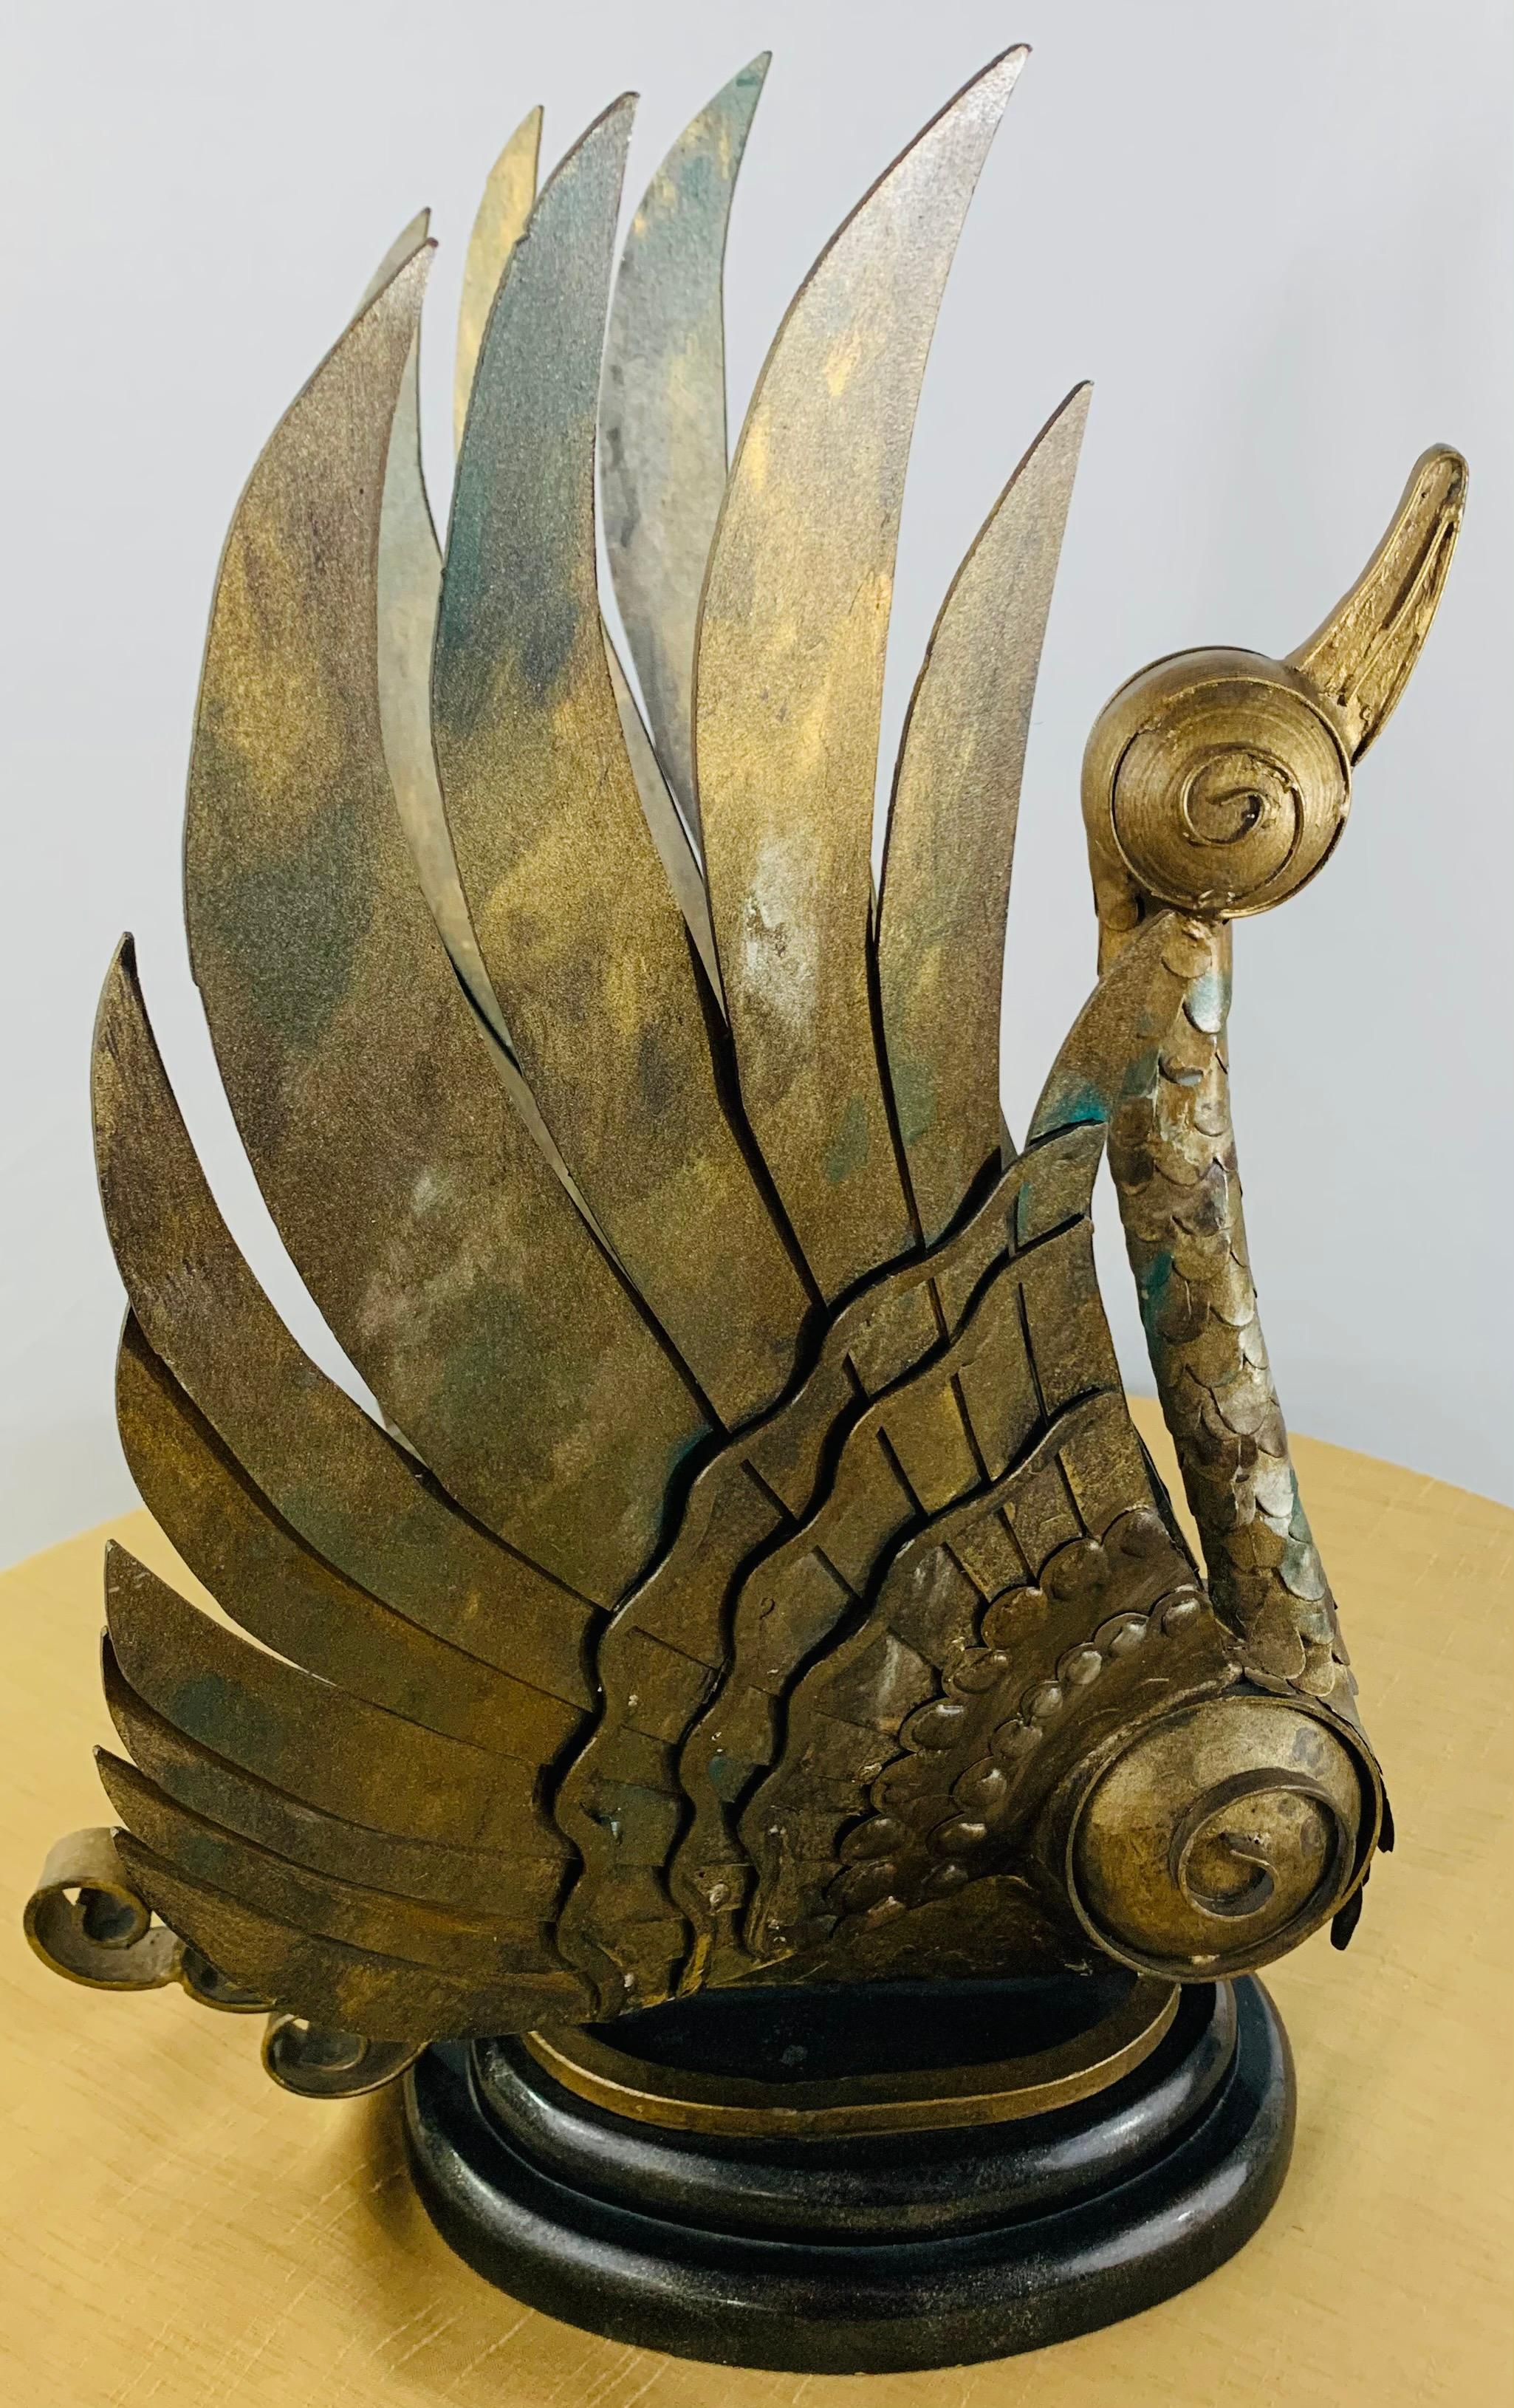 A unique and highly decorative pair of Brutalist style swan statues in bronze both in a takeoff position. The wings are finely. Carved displaying amazing details with scrolls design. Each statue seats on around wooden black base. Some display of